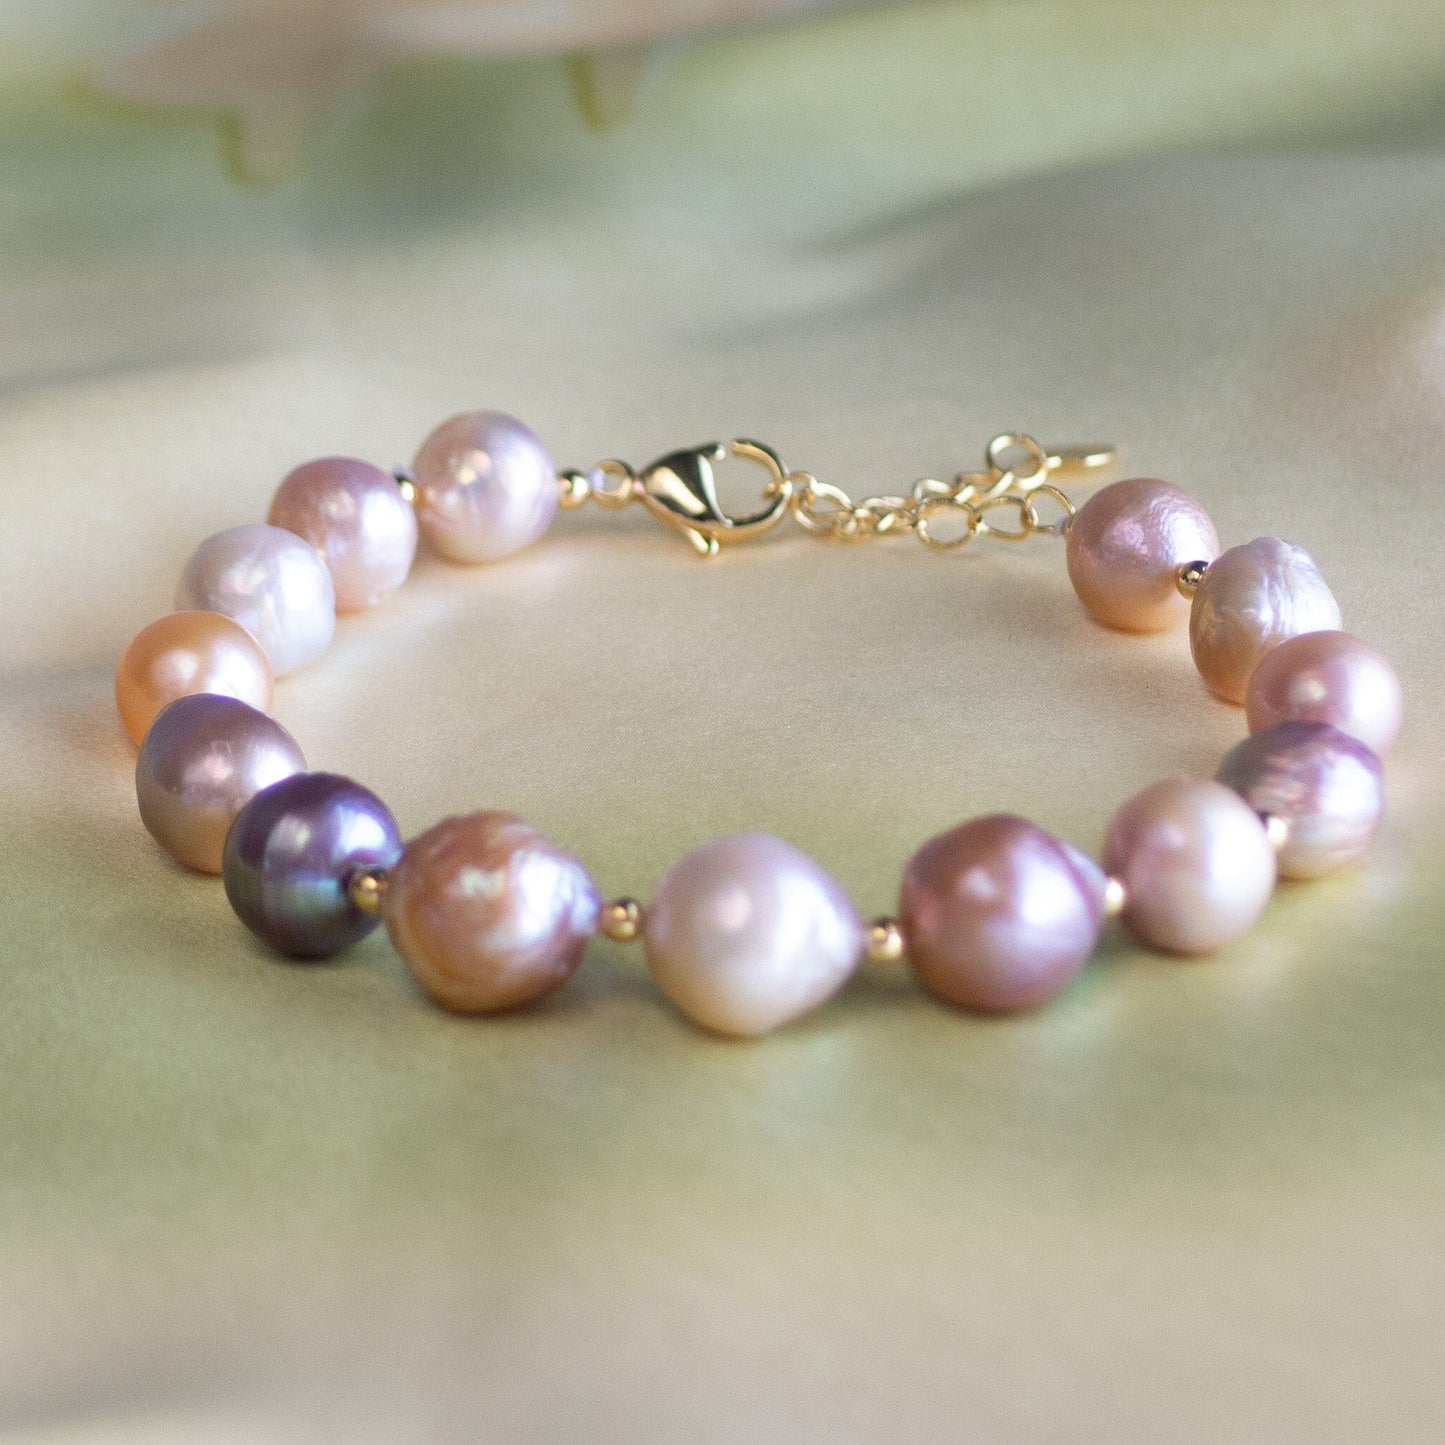 Cheekoo's Handcrafted Multicolor Cultured Freshwater Baroque Pearl Bracelet with Gold Finish Chain and Beads, 10 mm Pearl, 7.5 Inch Long